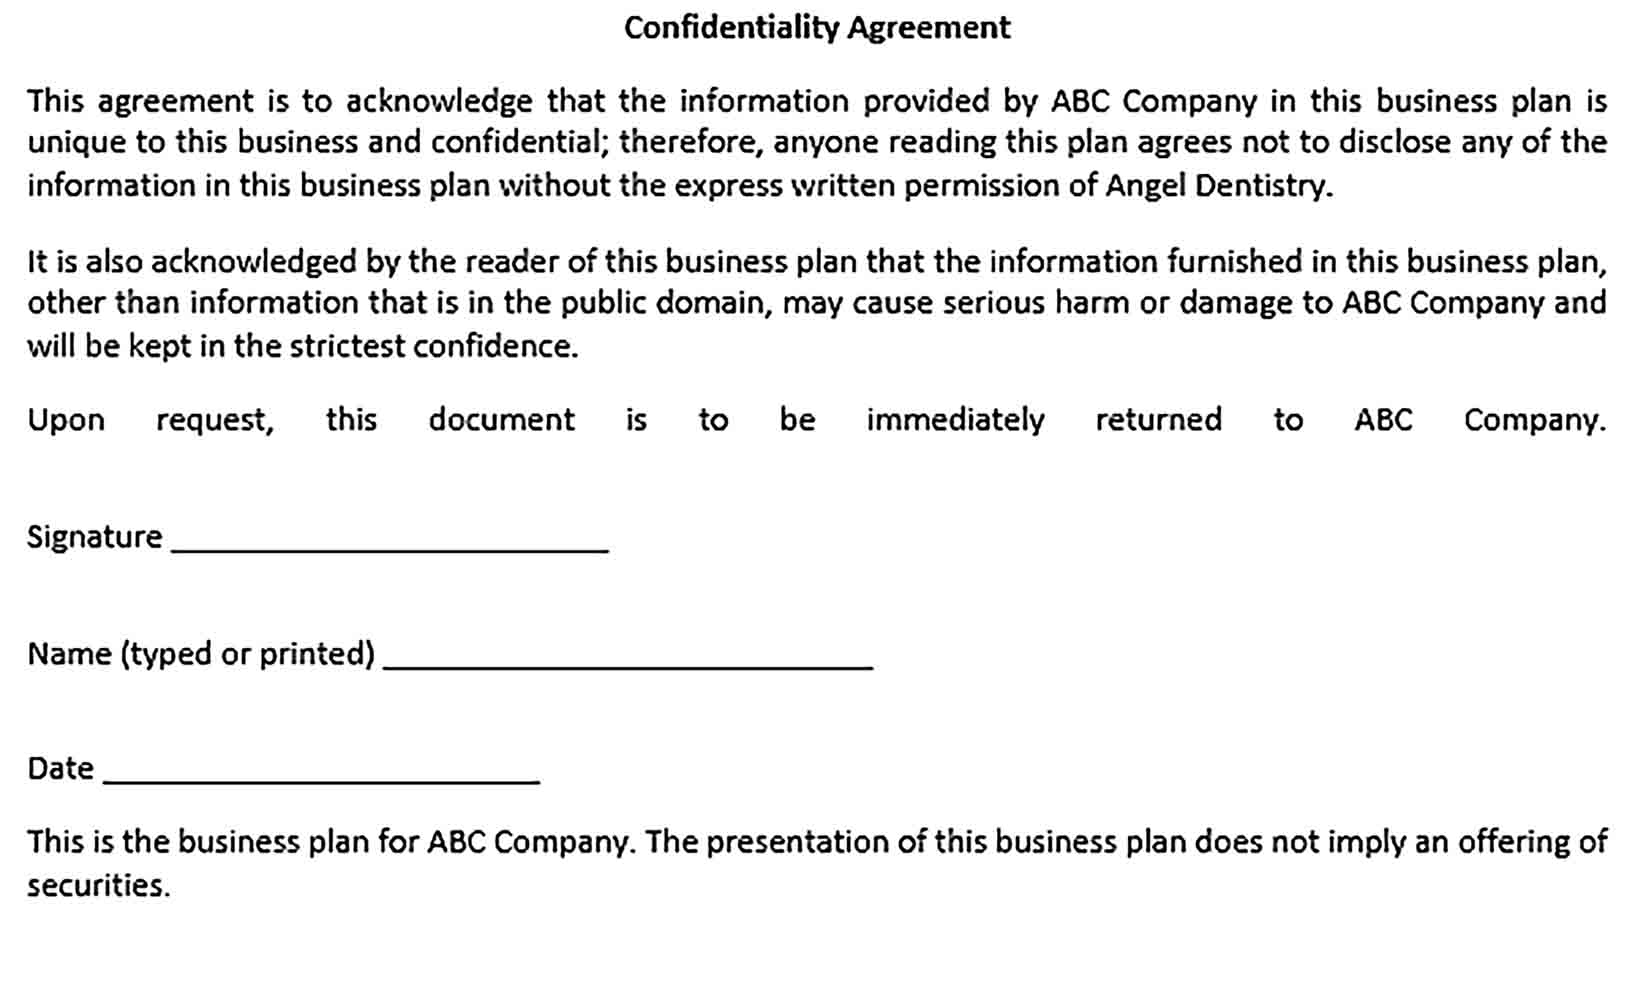 Sample Basic Confidentiality Agreement for Business